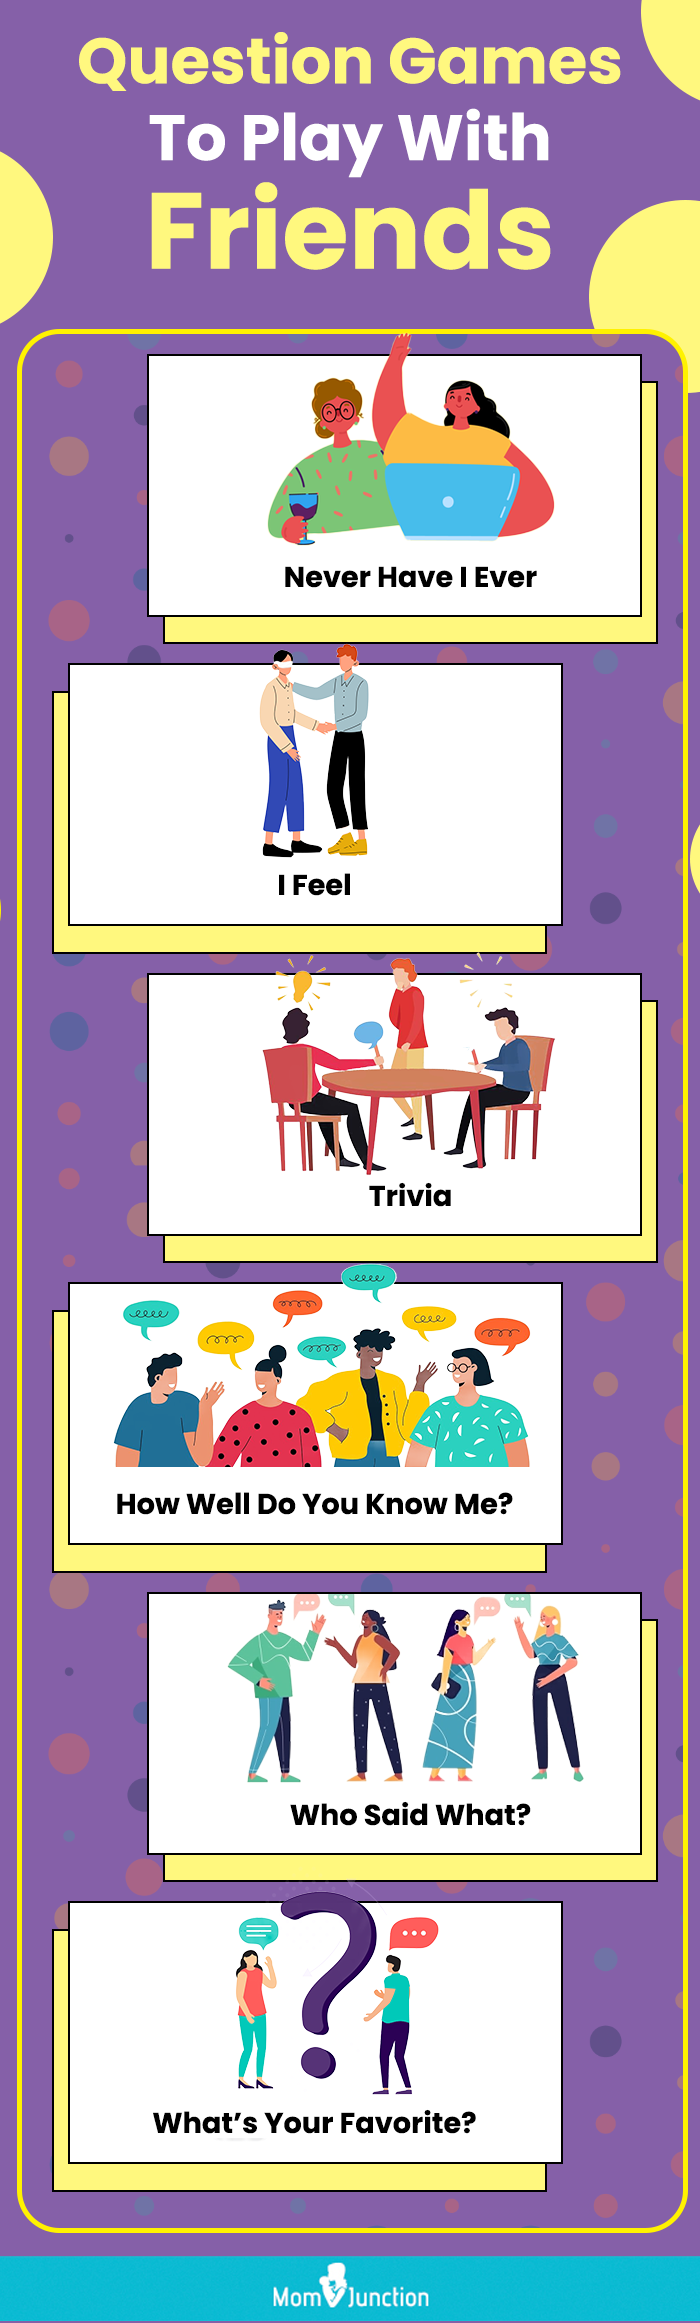 question games for friends to play [infographic]